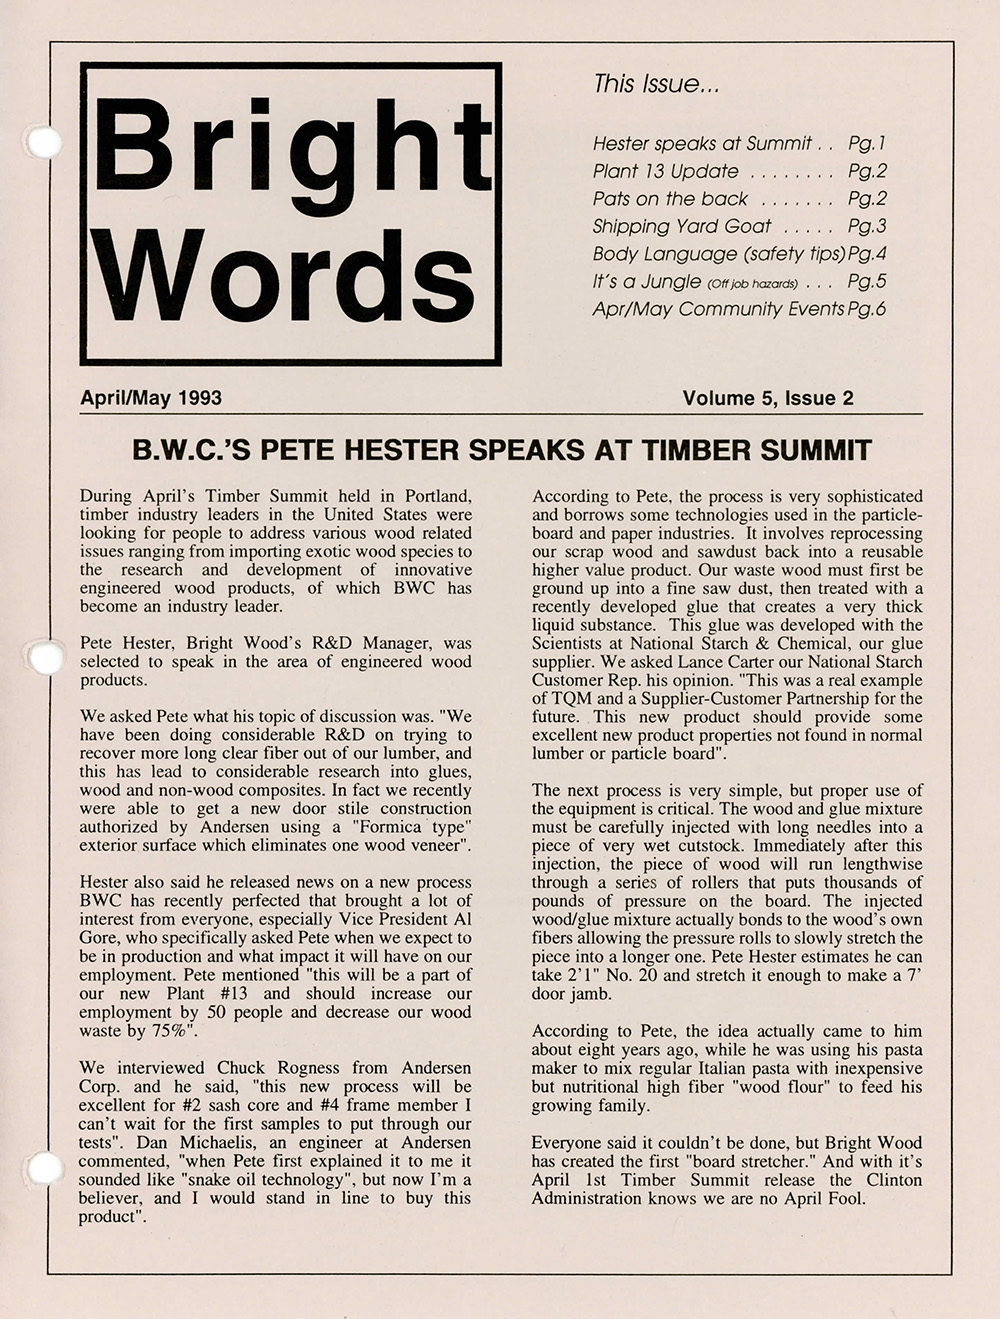 Bright Words newsletter from 1993